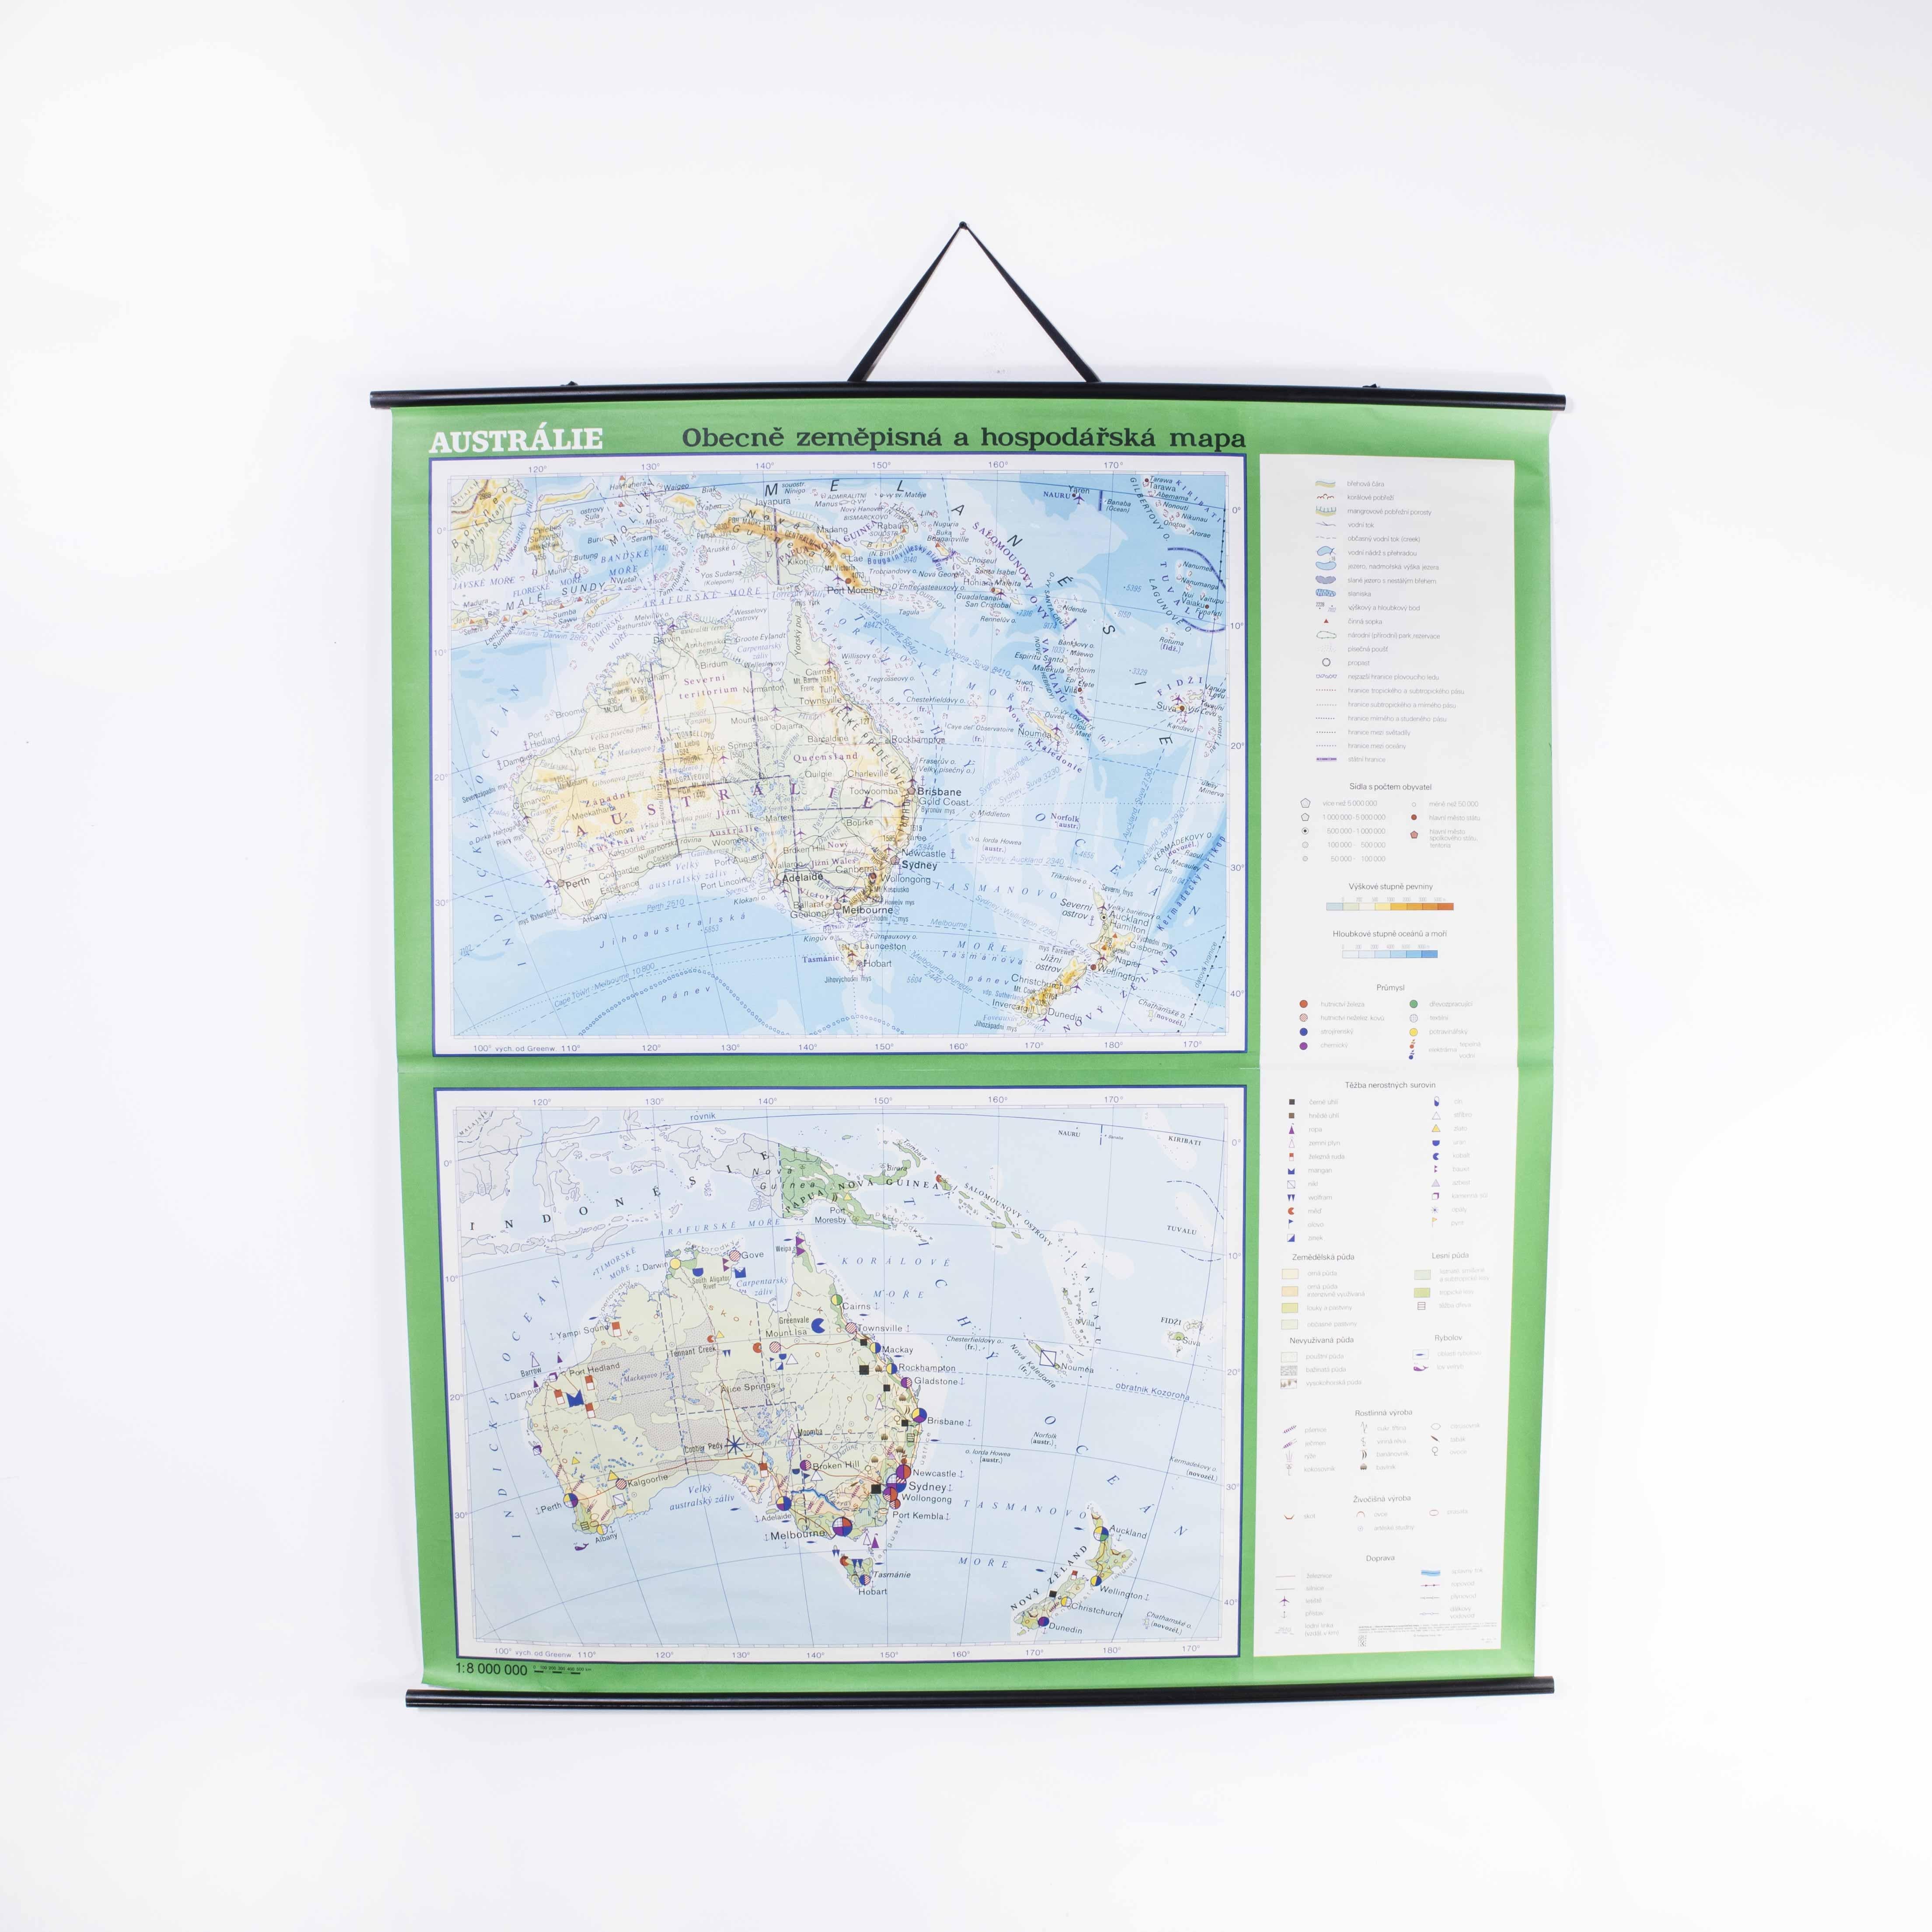 Late 20th Century Educational Geographic Map - Australia Topography And Economy In Good Condition For Sale In Hook, Hampshire